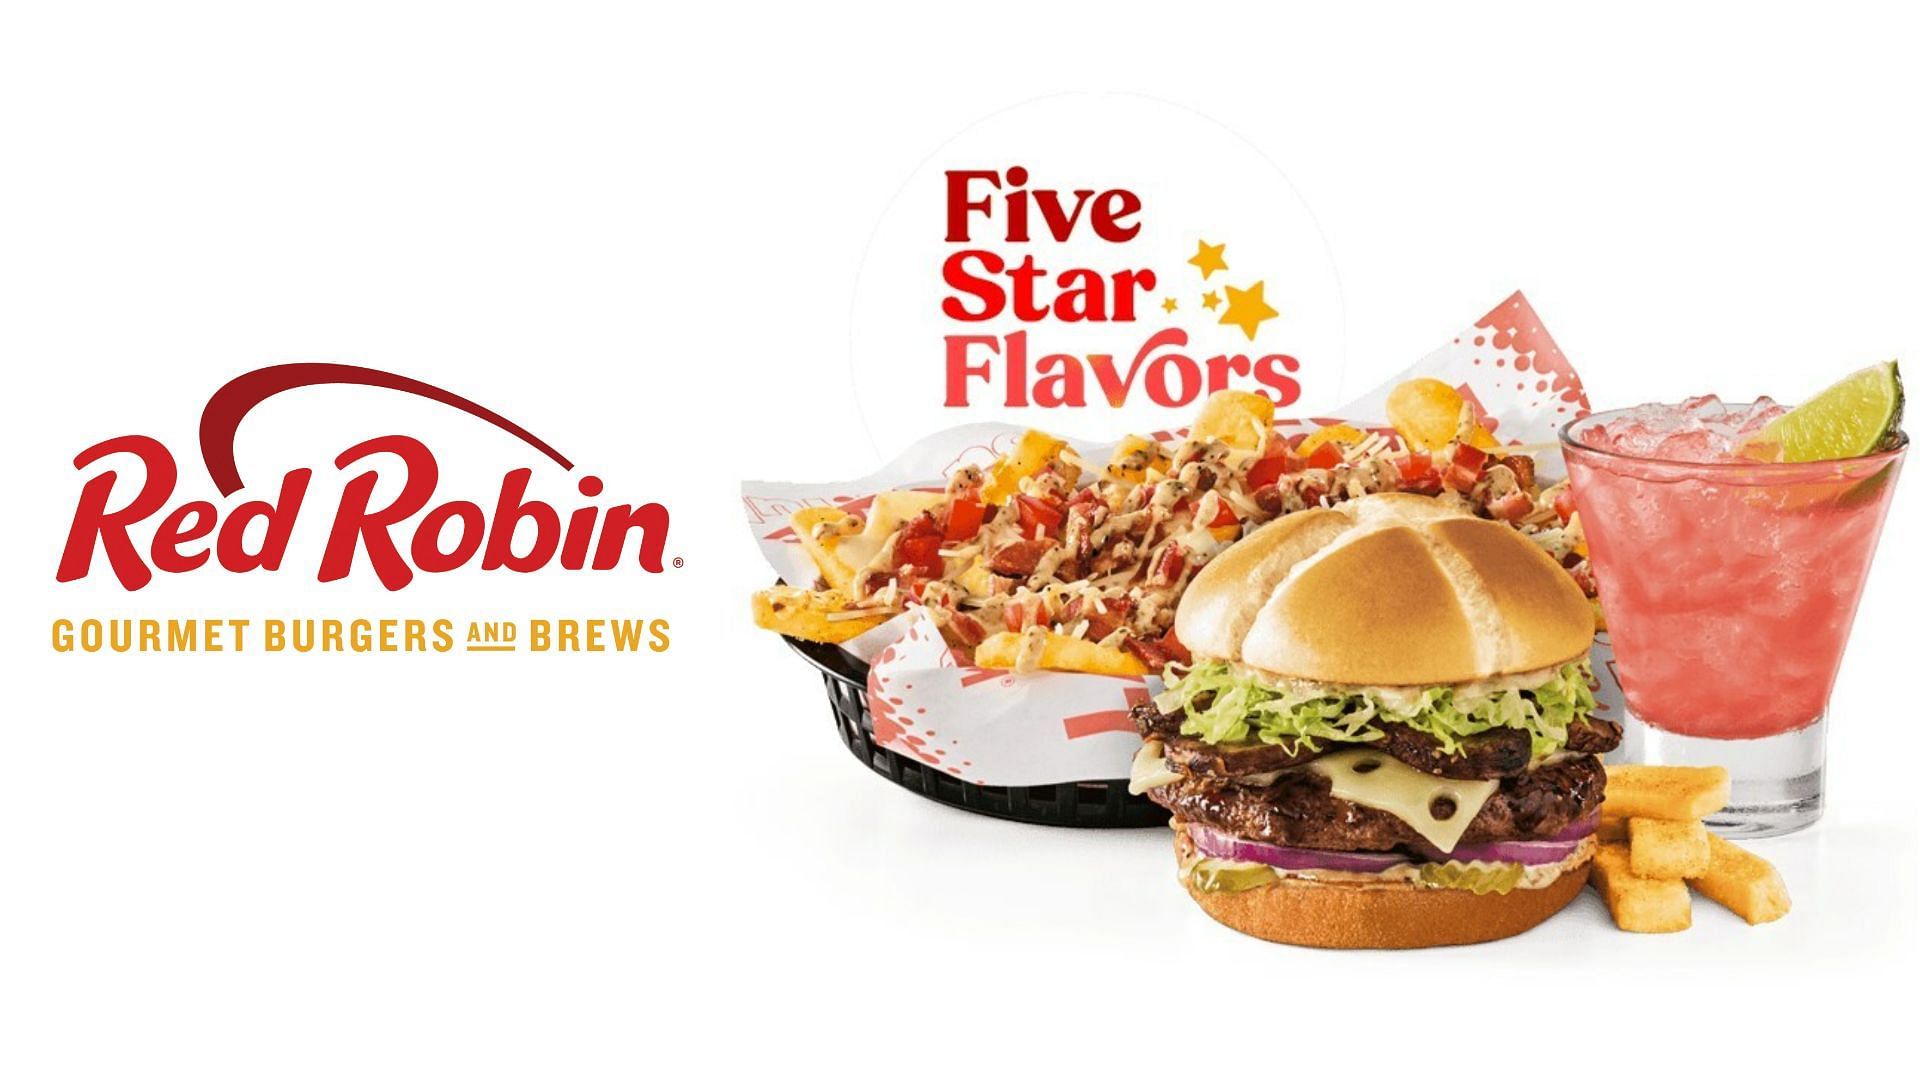 The Red Robin fast food restaurant chain has introduced a Five Star Flavors menu line-up for a limited time (Image via Red Robin)